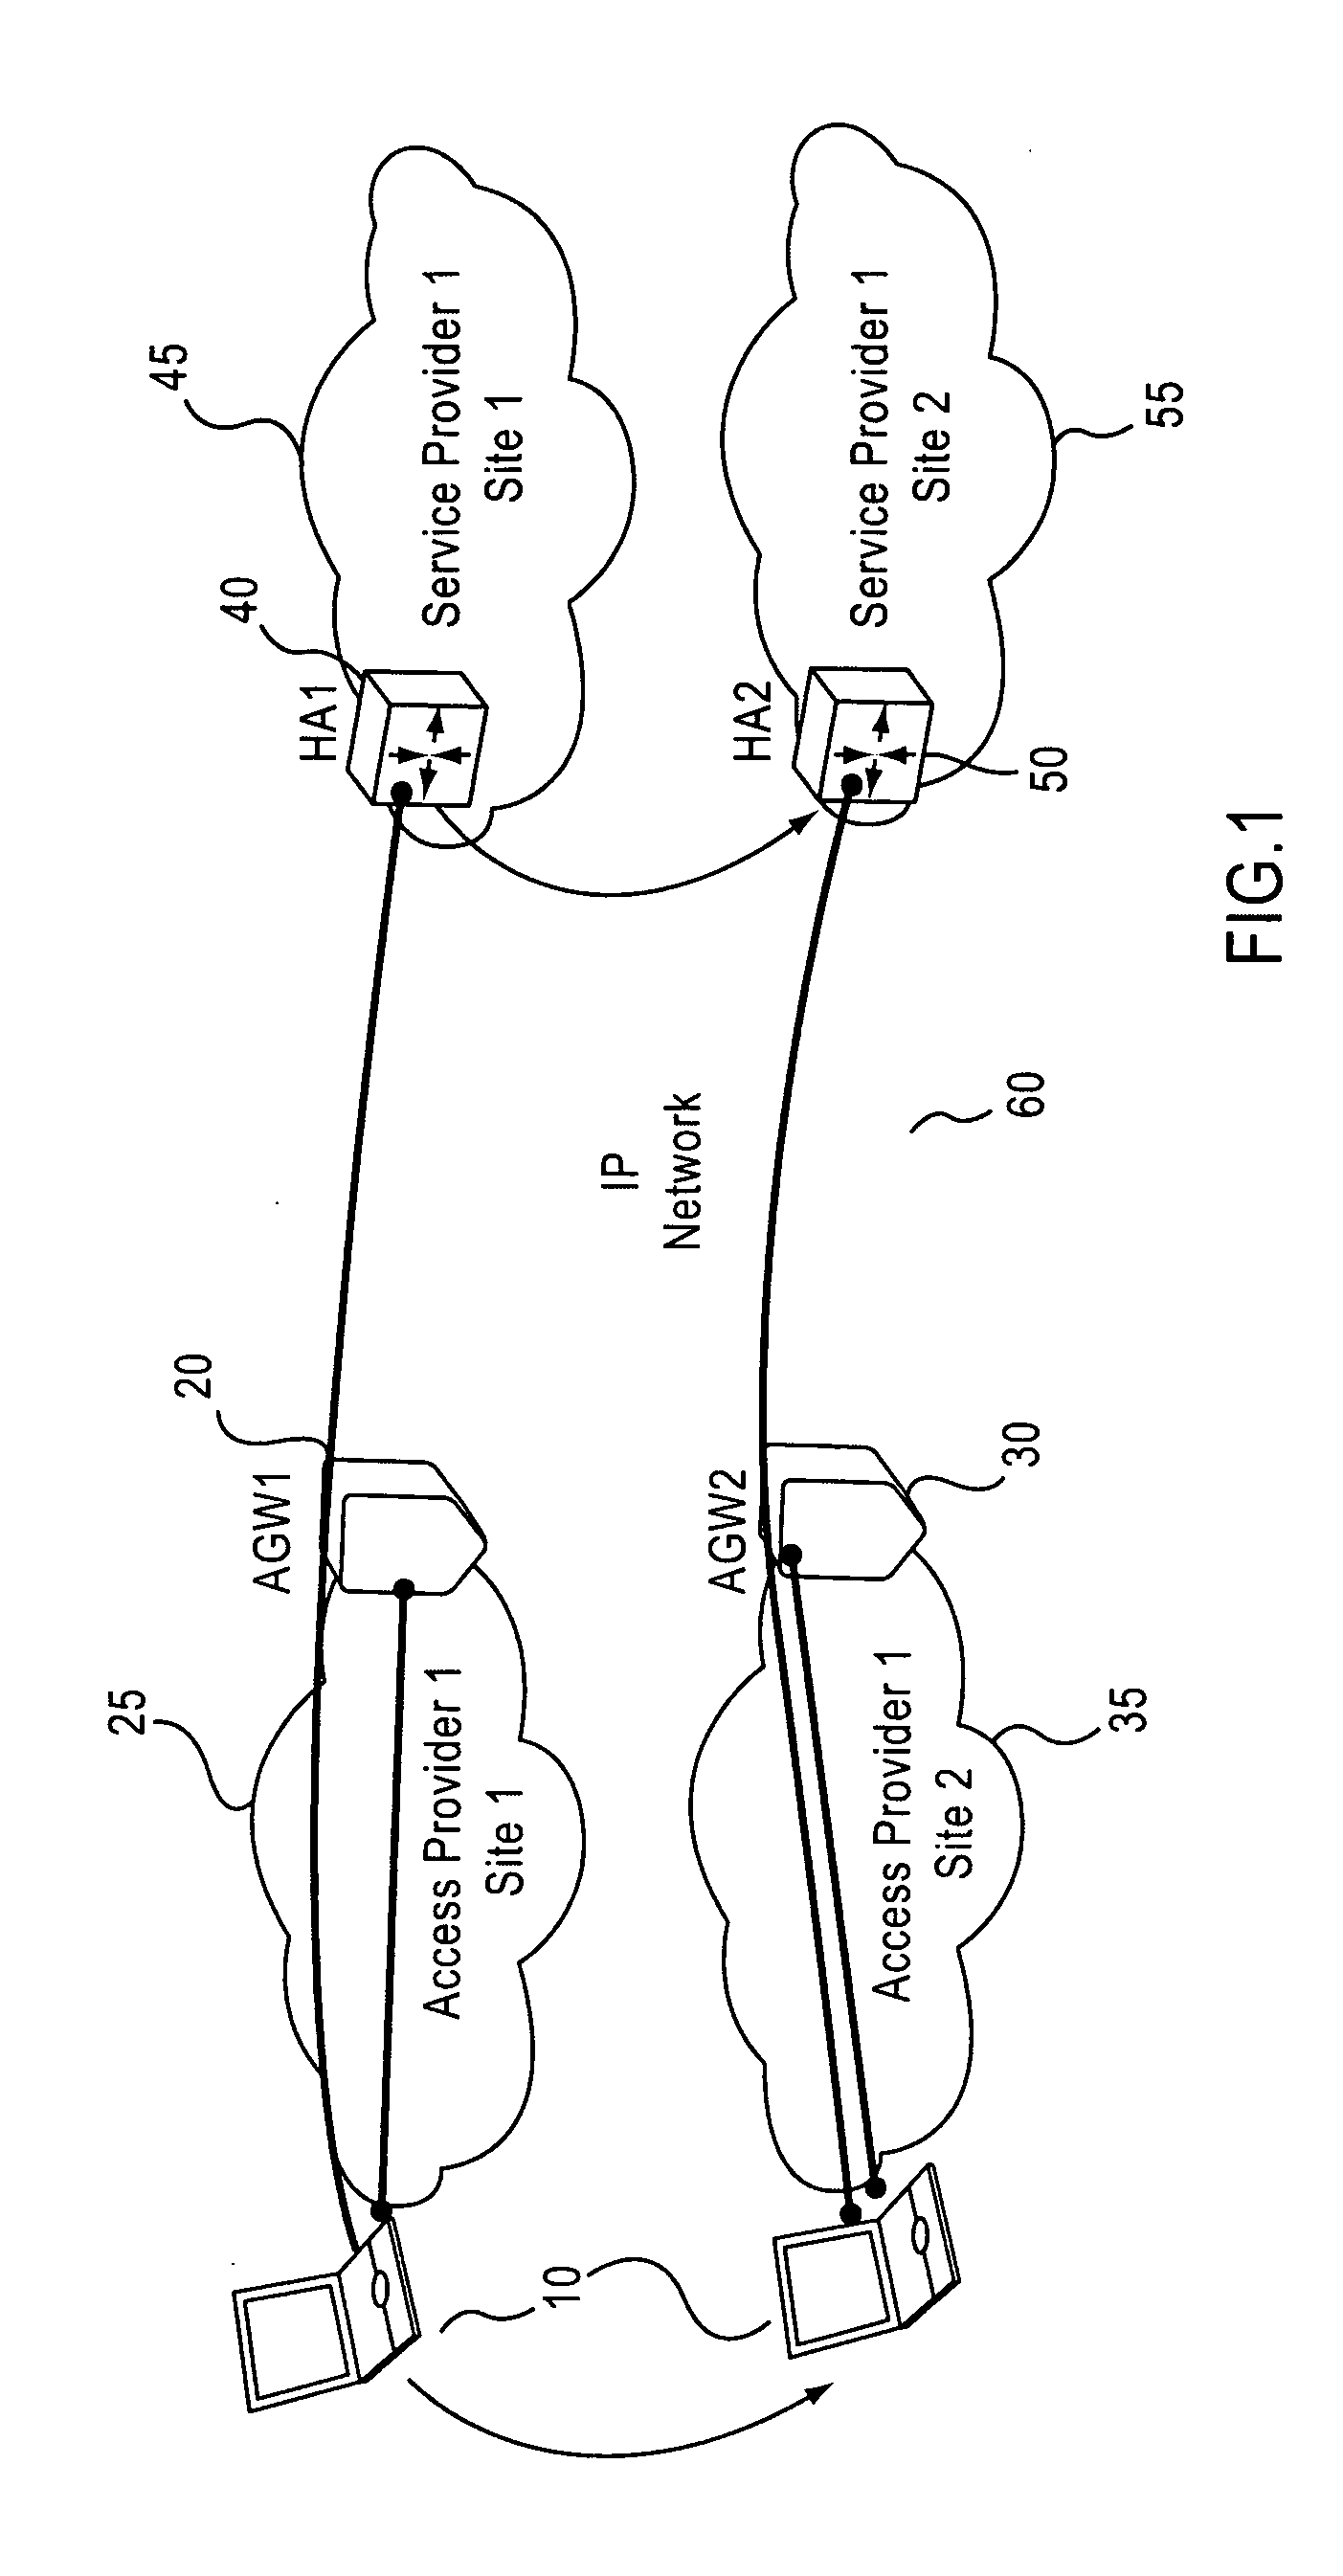 Selection of an access layer termination node in a multi-access network environment